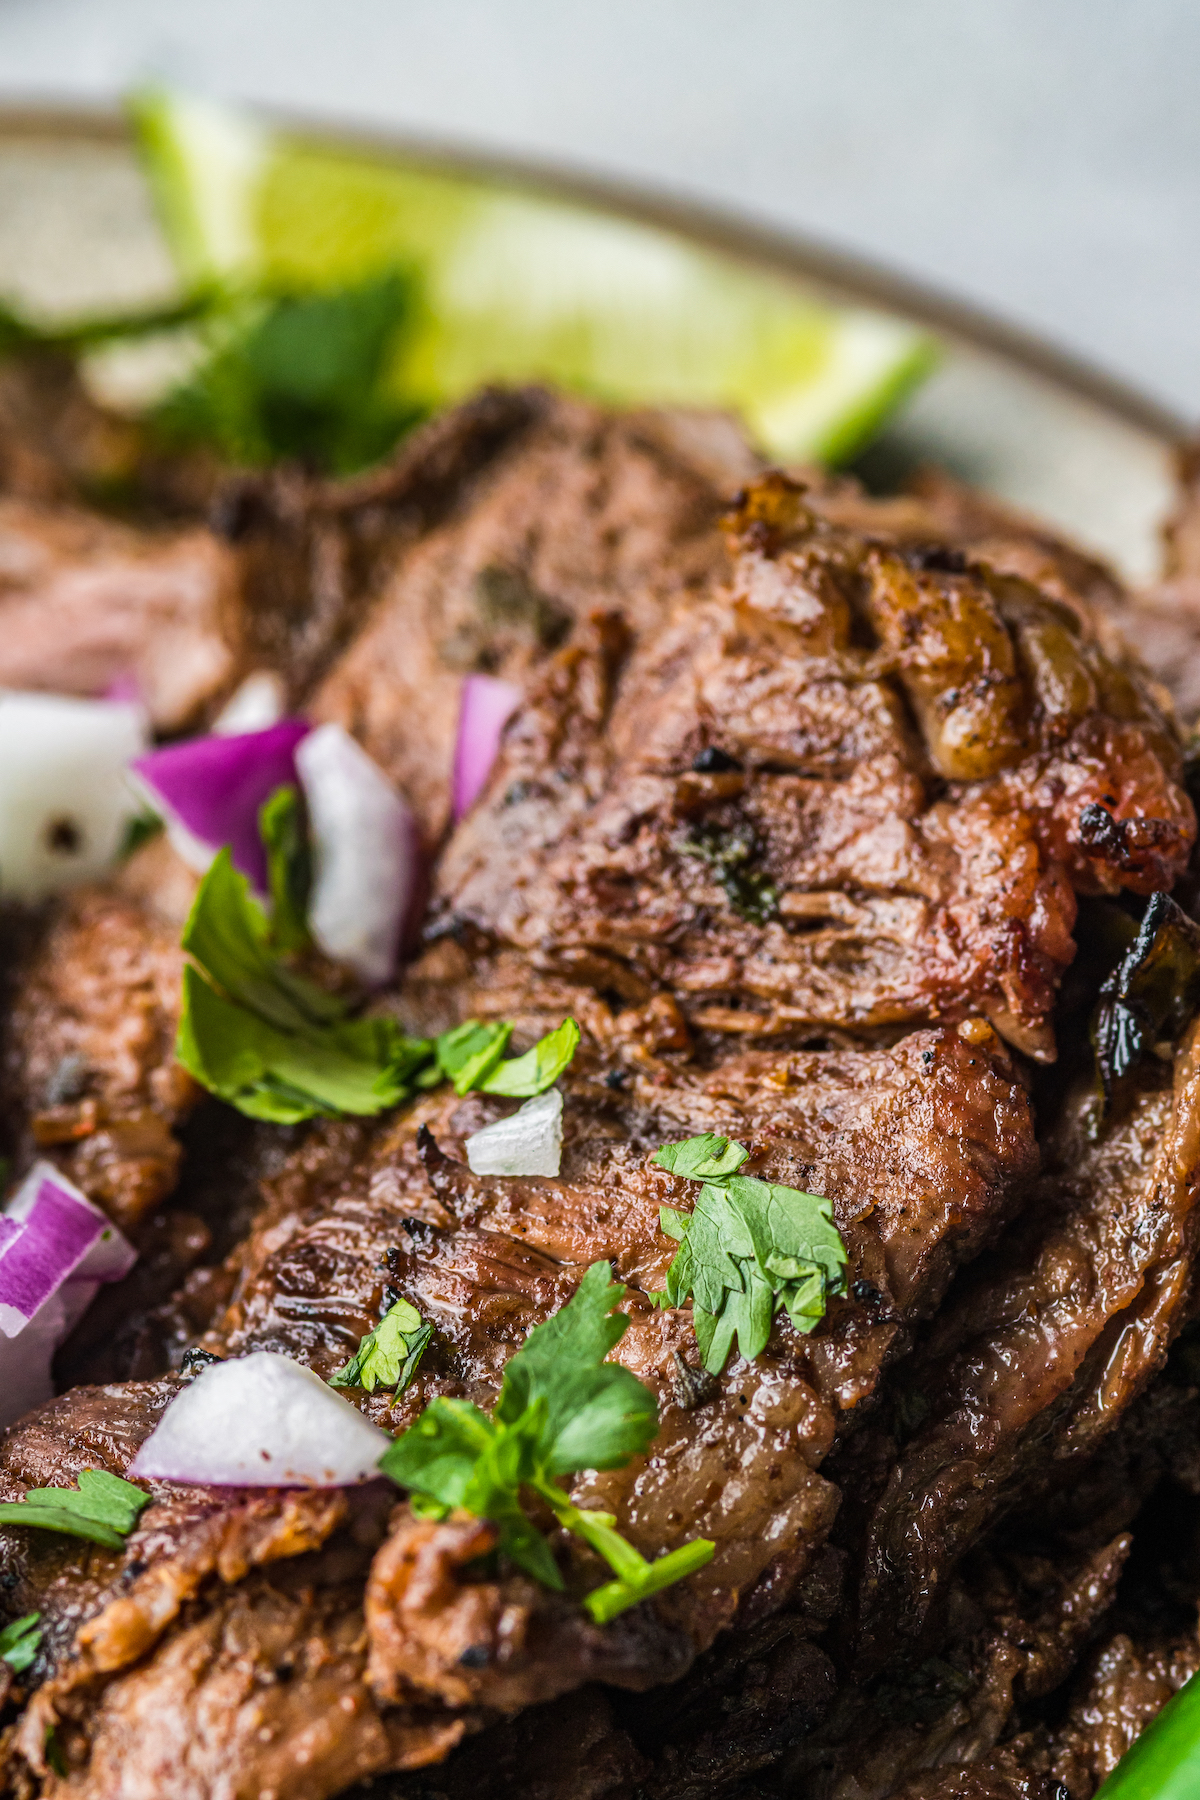 Grilled steak, garnished with chopped red onion and cilantro.